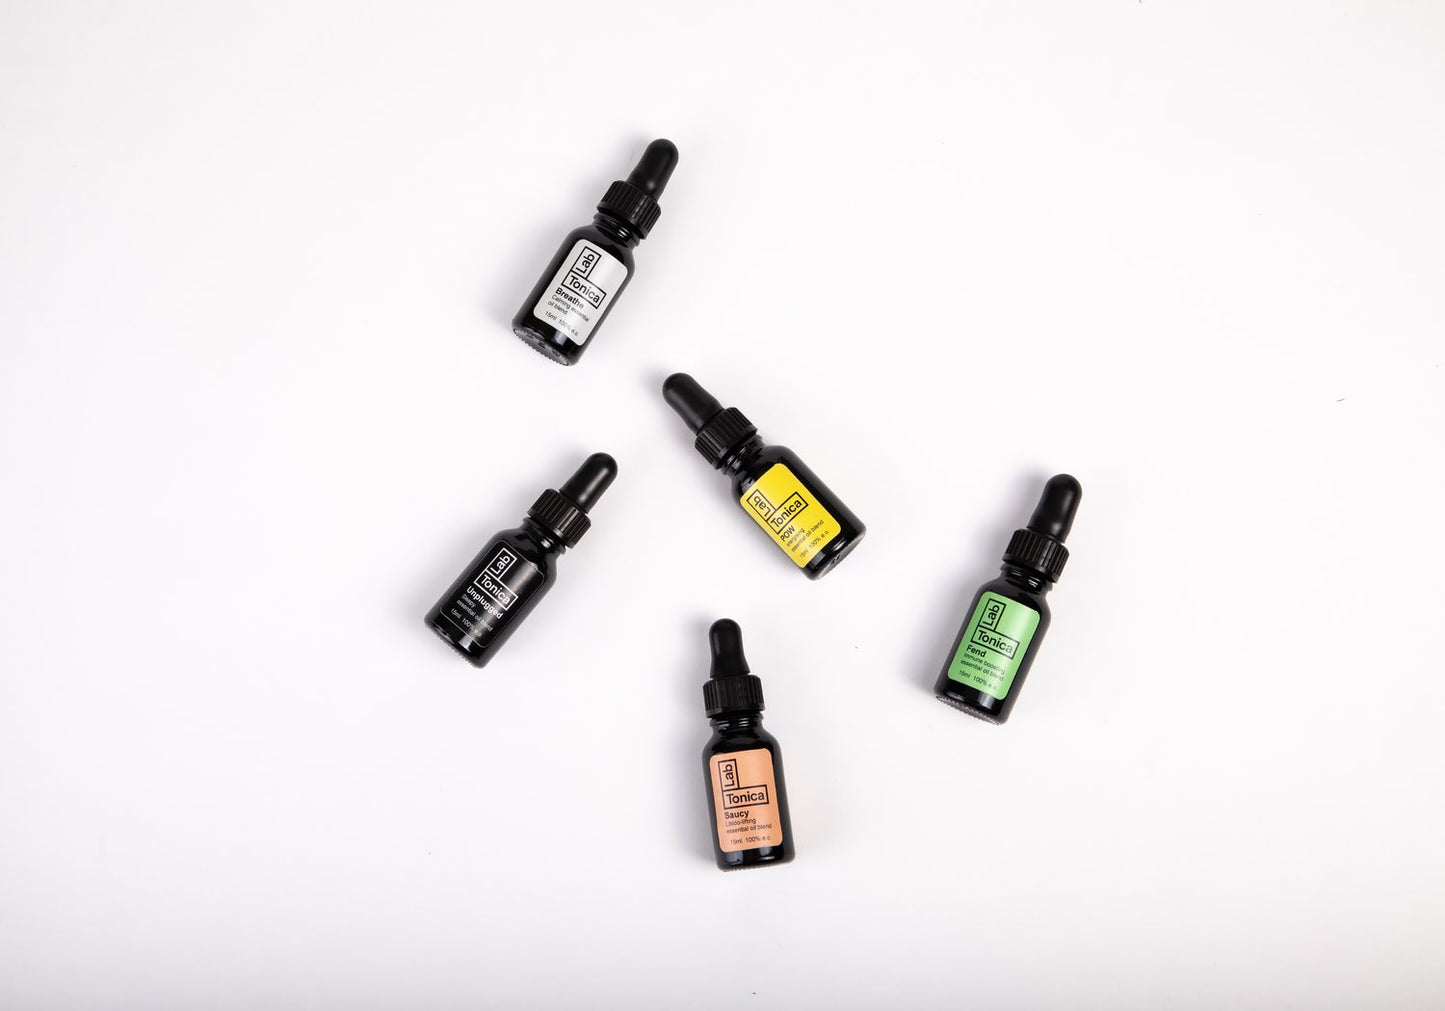 The Every Space 100% essential oils by Lab Tonica